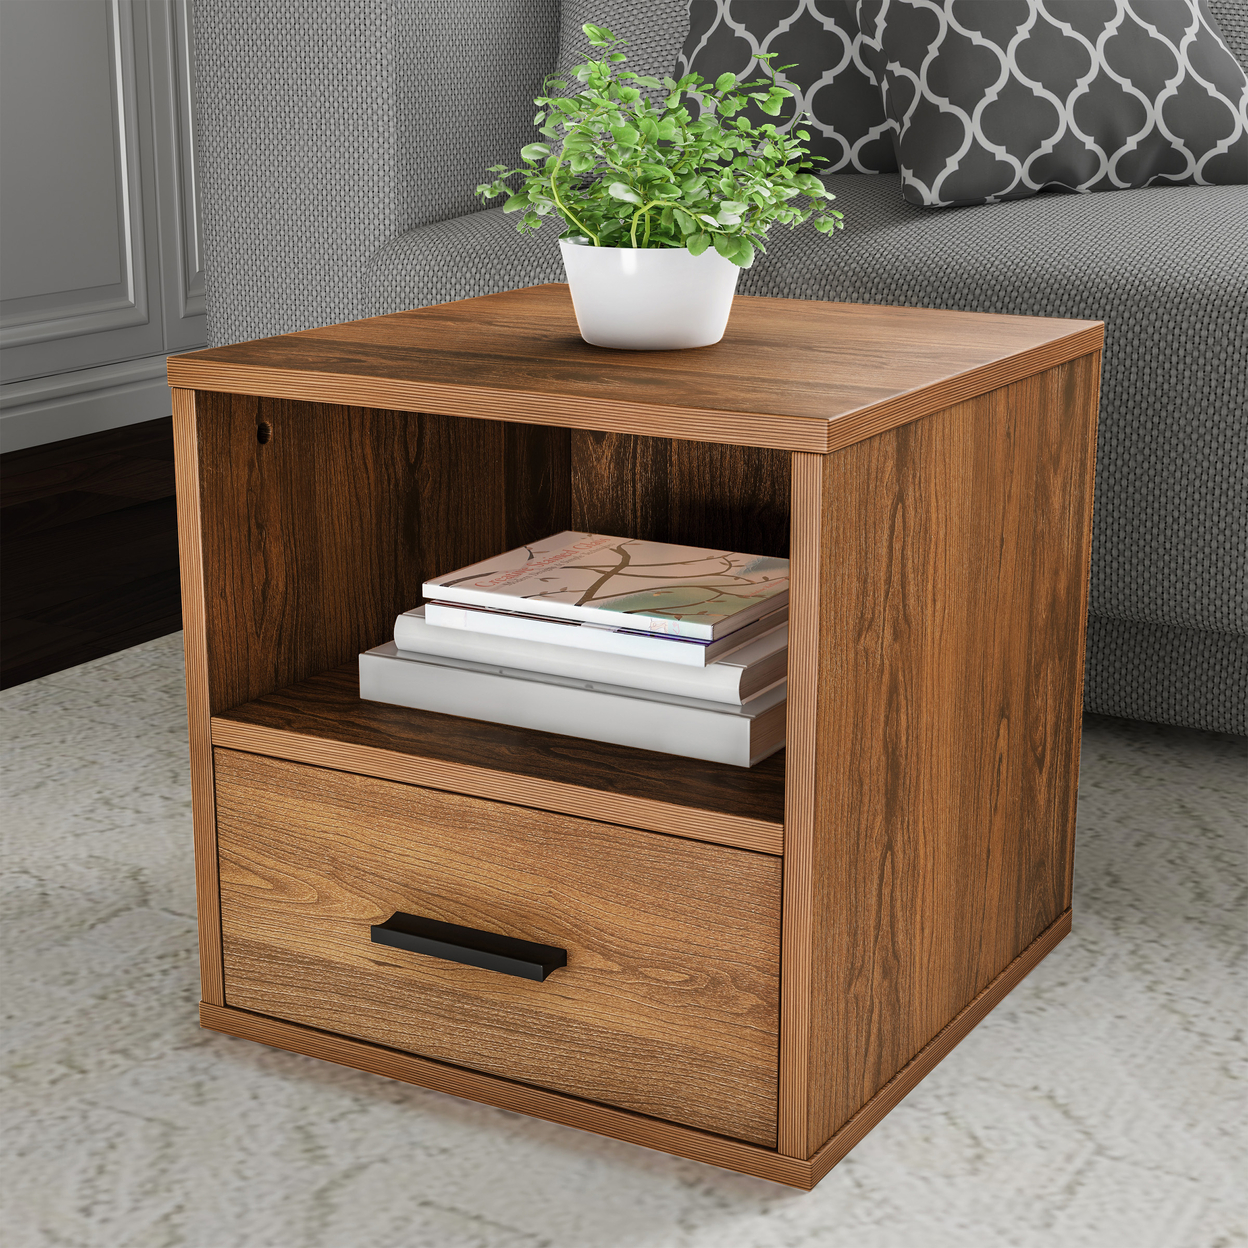 Brown End Table Cube Accent Table 16 Inches With Drawer Bedroom Livingroom